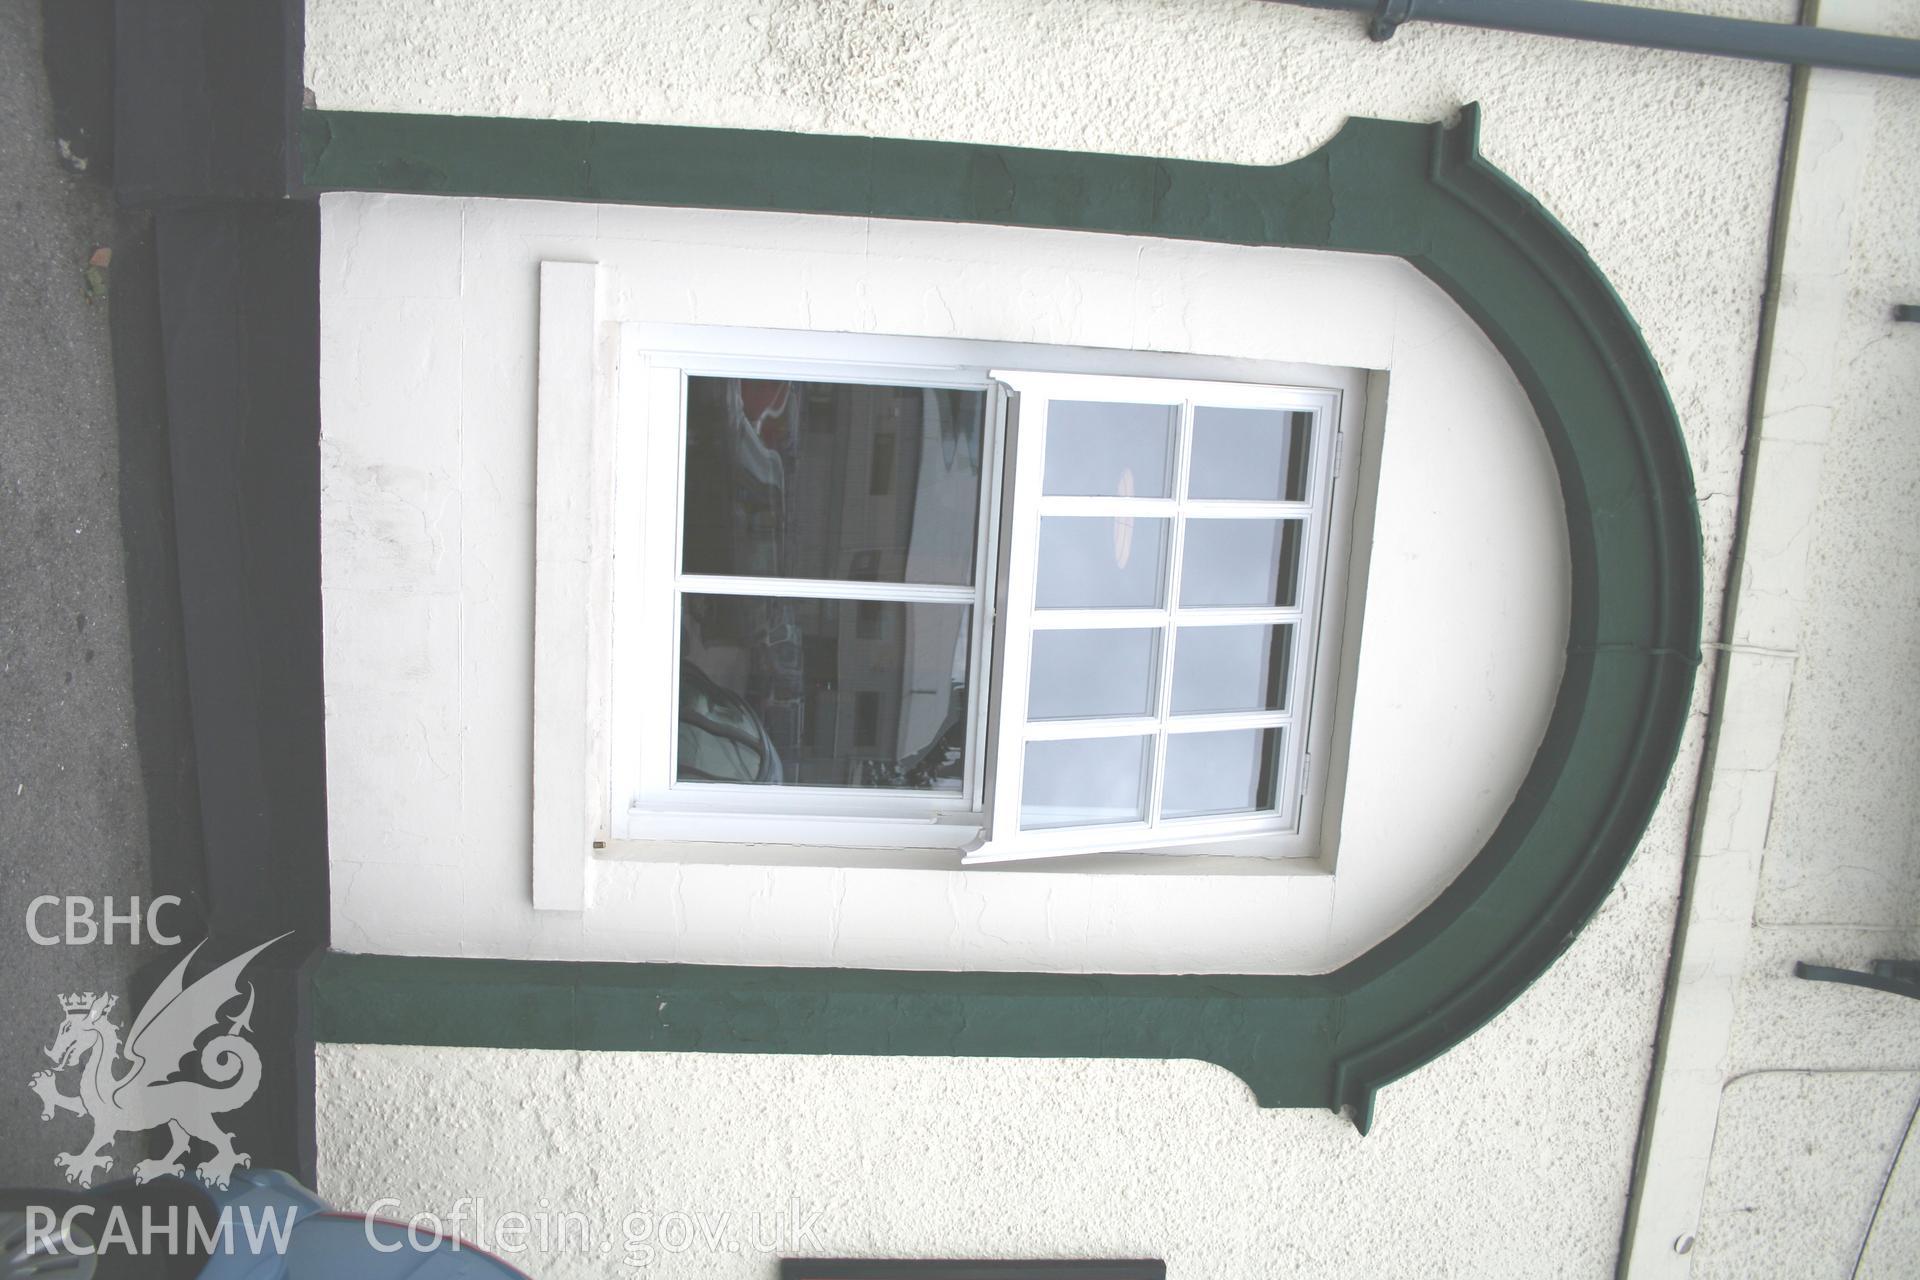 Turf Hotel, Mold Road, Wrexham. Sash window &moulded surround to south-east elevation.